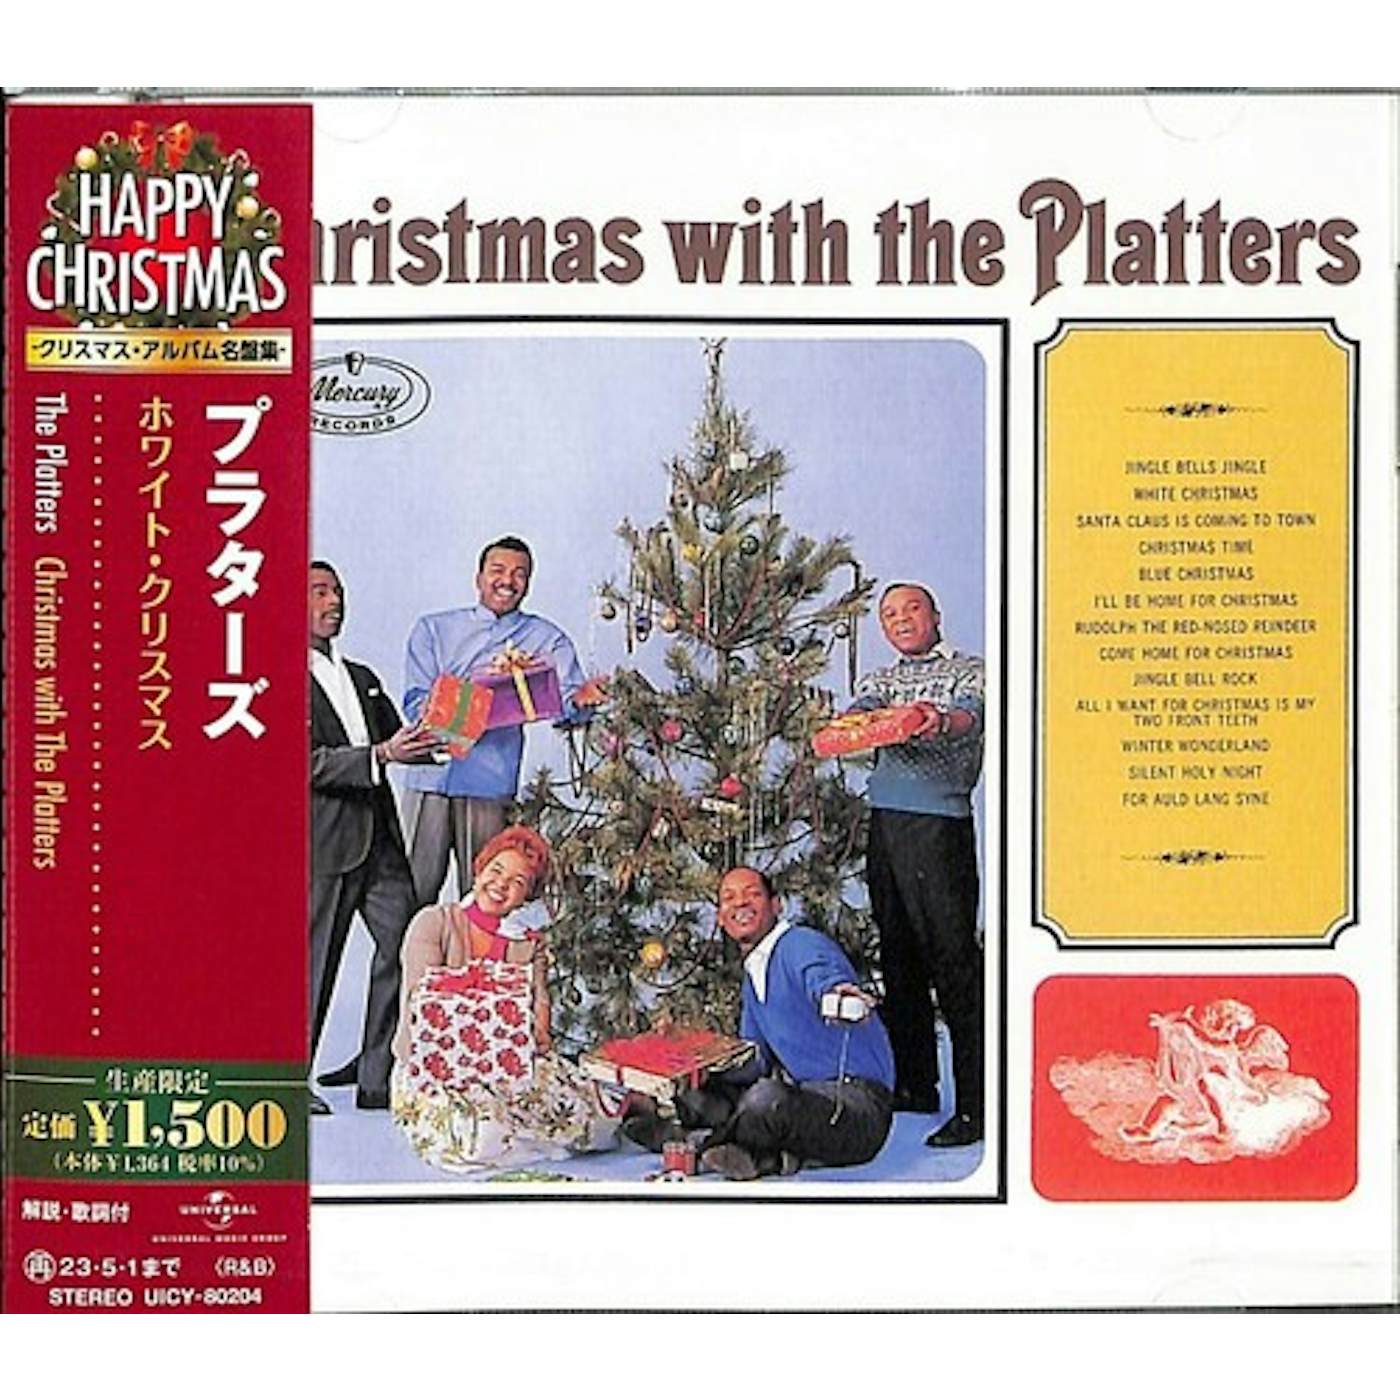 CHRISTMAS WITH THE PLATTERS CD